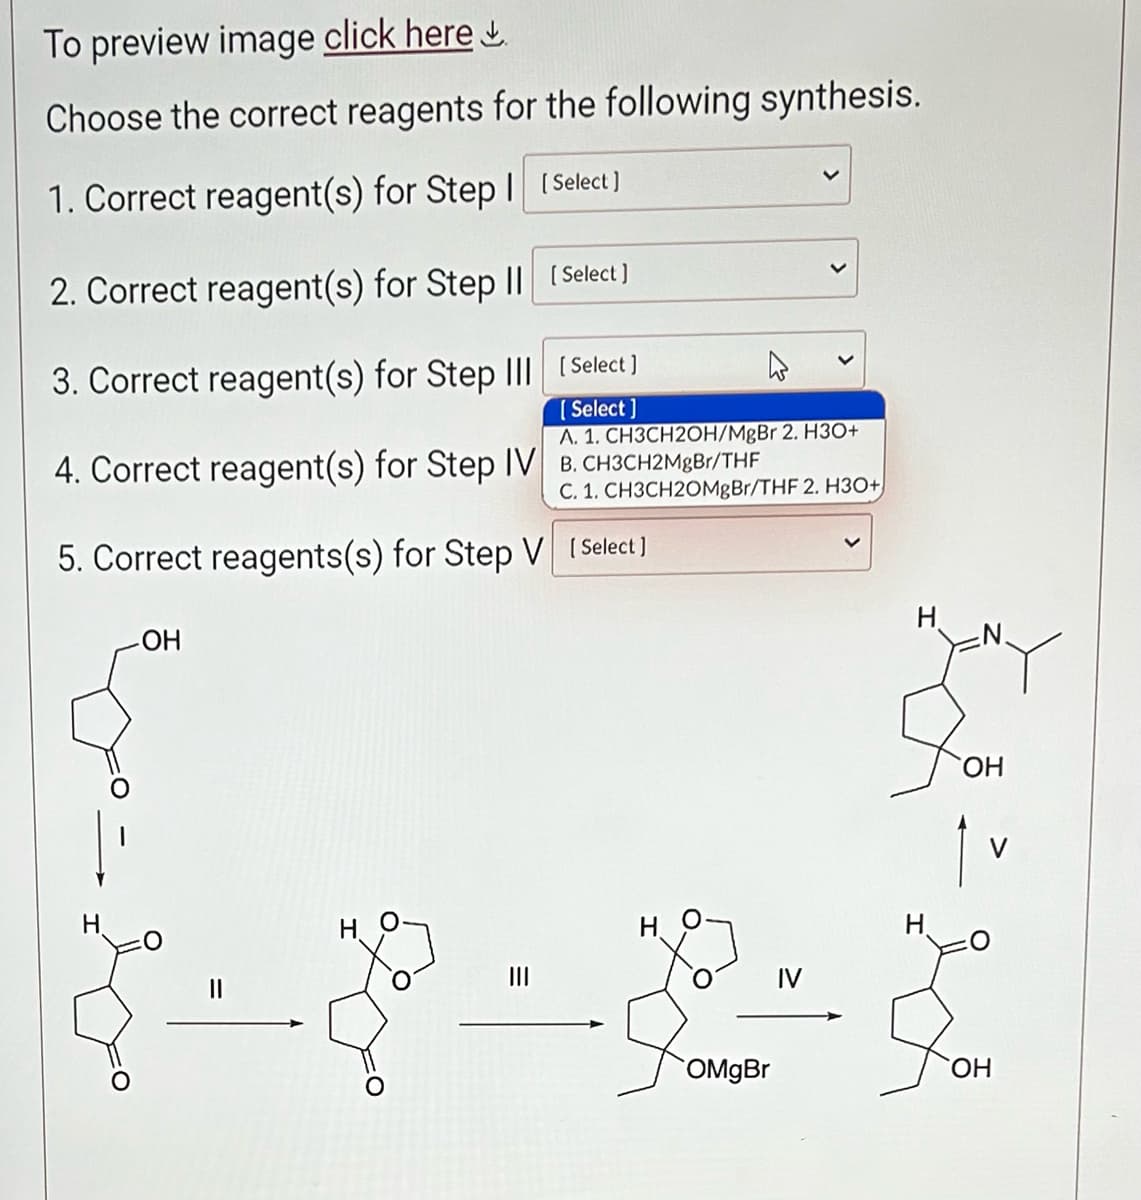 To preview image click here
Choose the correct reagents for the following synthesis.
1. Correct reagent(s) for Step 1 [Select]
2. Correct reagent(s) for Step II [Select]
3. Correct reagent(s) for Step III
[Select]
[Select]
4. Correct reagent(s) for Step IV B. CH3CH2MgBr/THF
H
A. 1. CH3CH2OH/MgBr 2. H3O+
5. Correct reagents(s) for Step V [Select]
-OH
H
C. 1. CH3CH20MgBr/THF 2. H3O+
OMgBr
IV
H
OH
V
OH